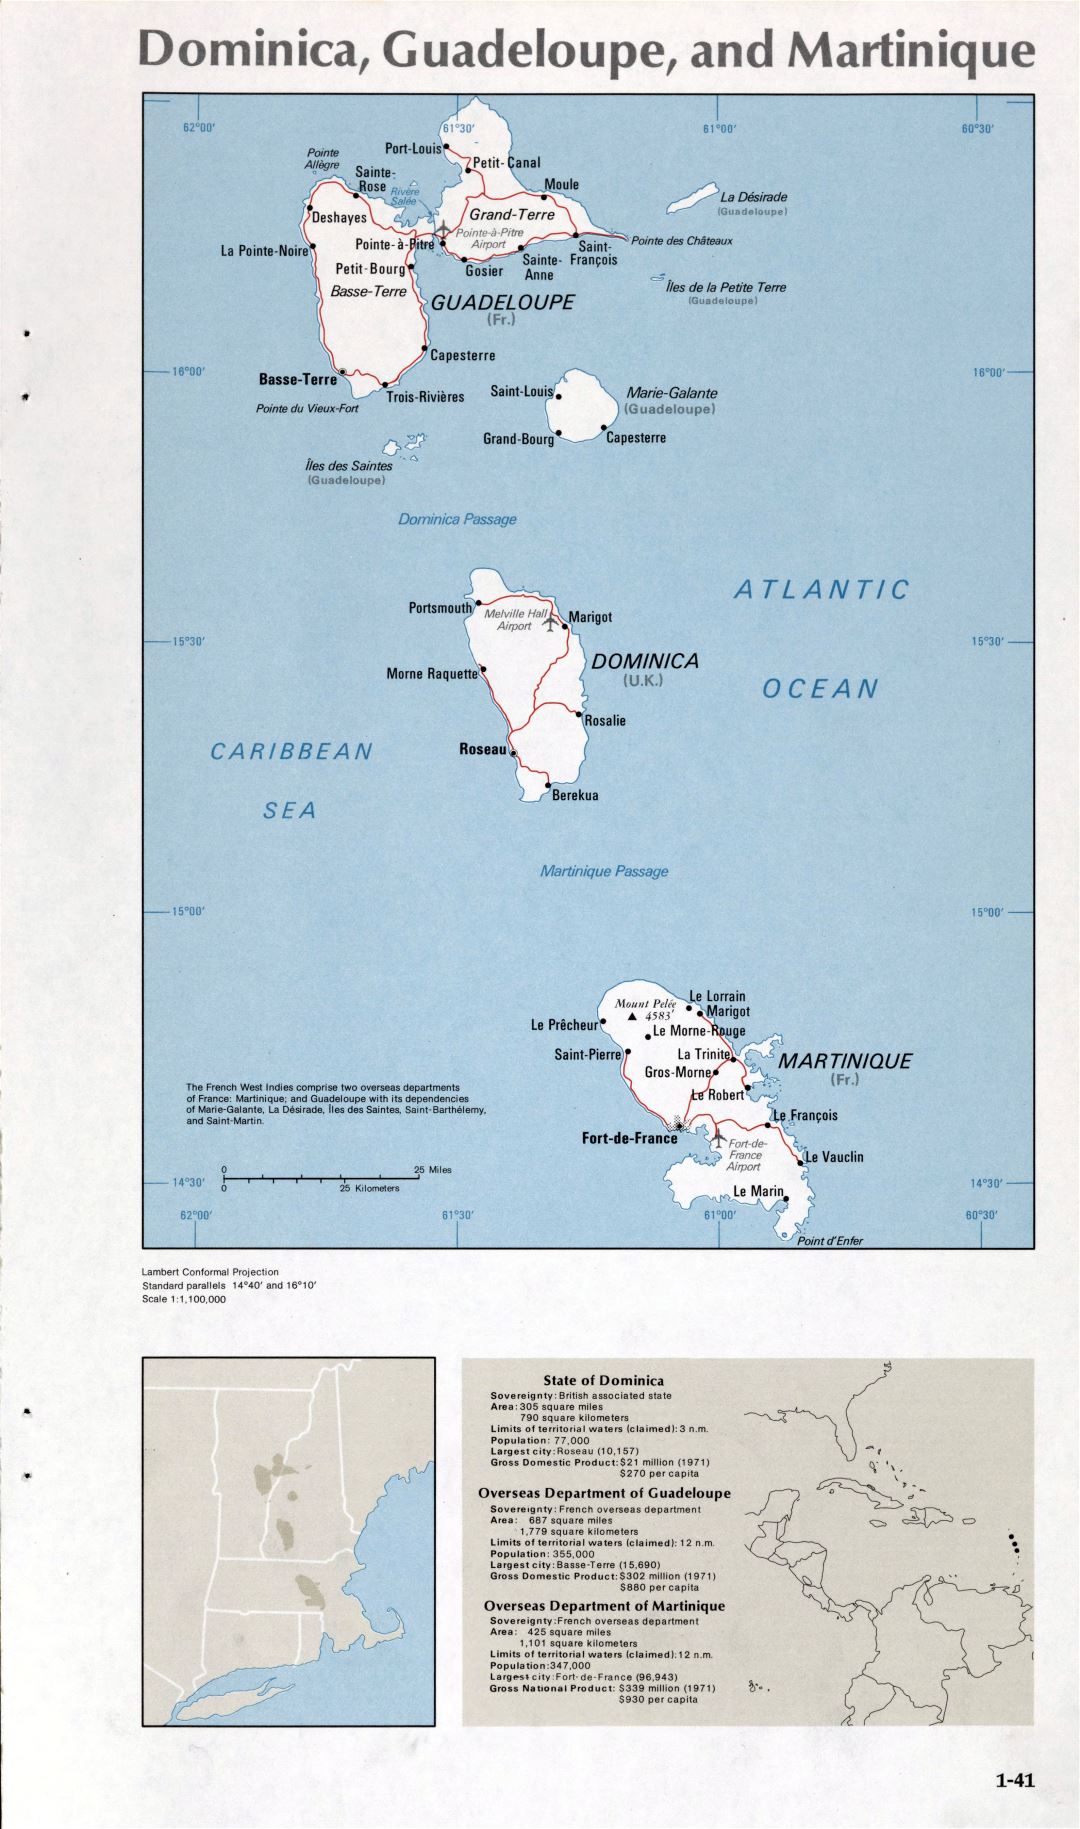 Map of Dominica, Guadeloupe and Martinique (1-41)